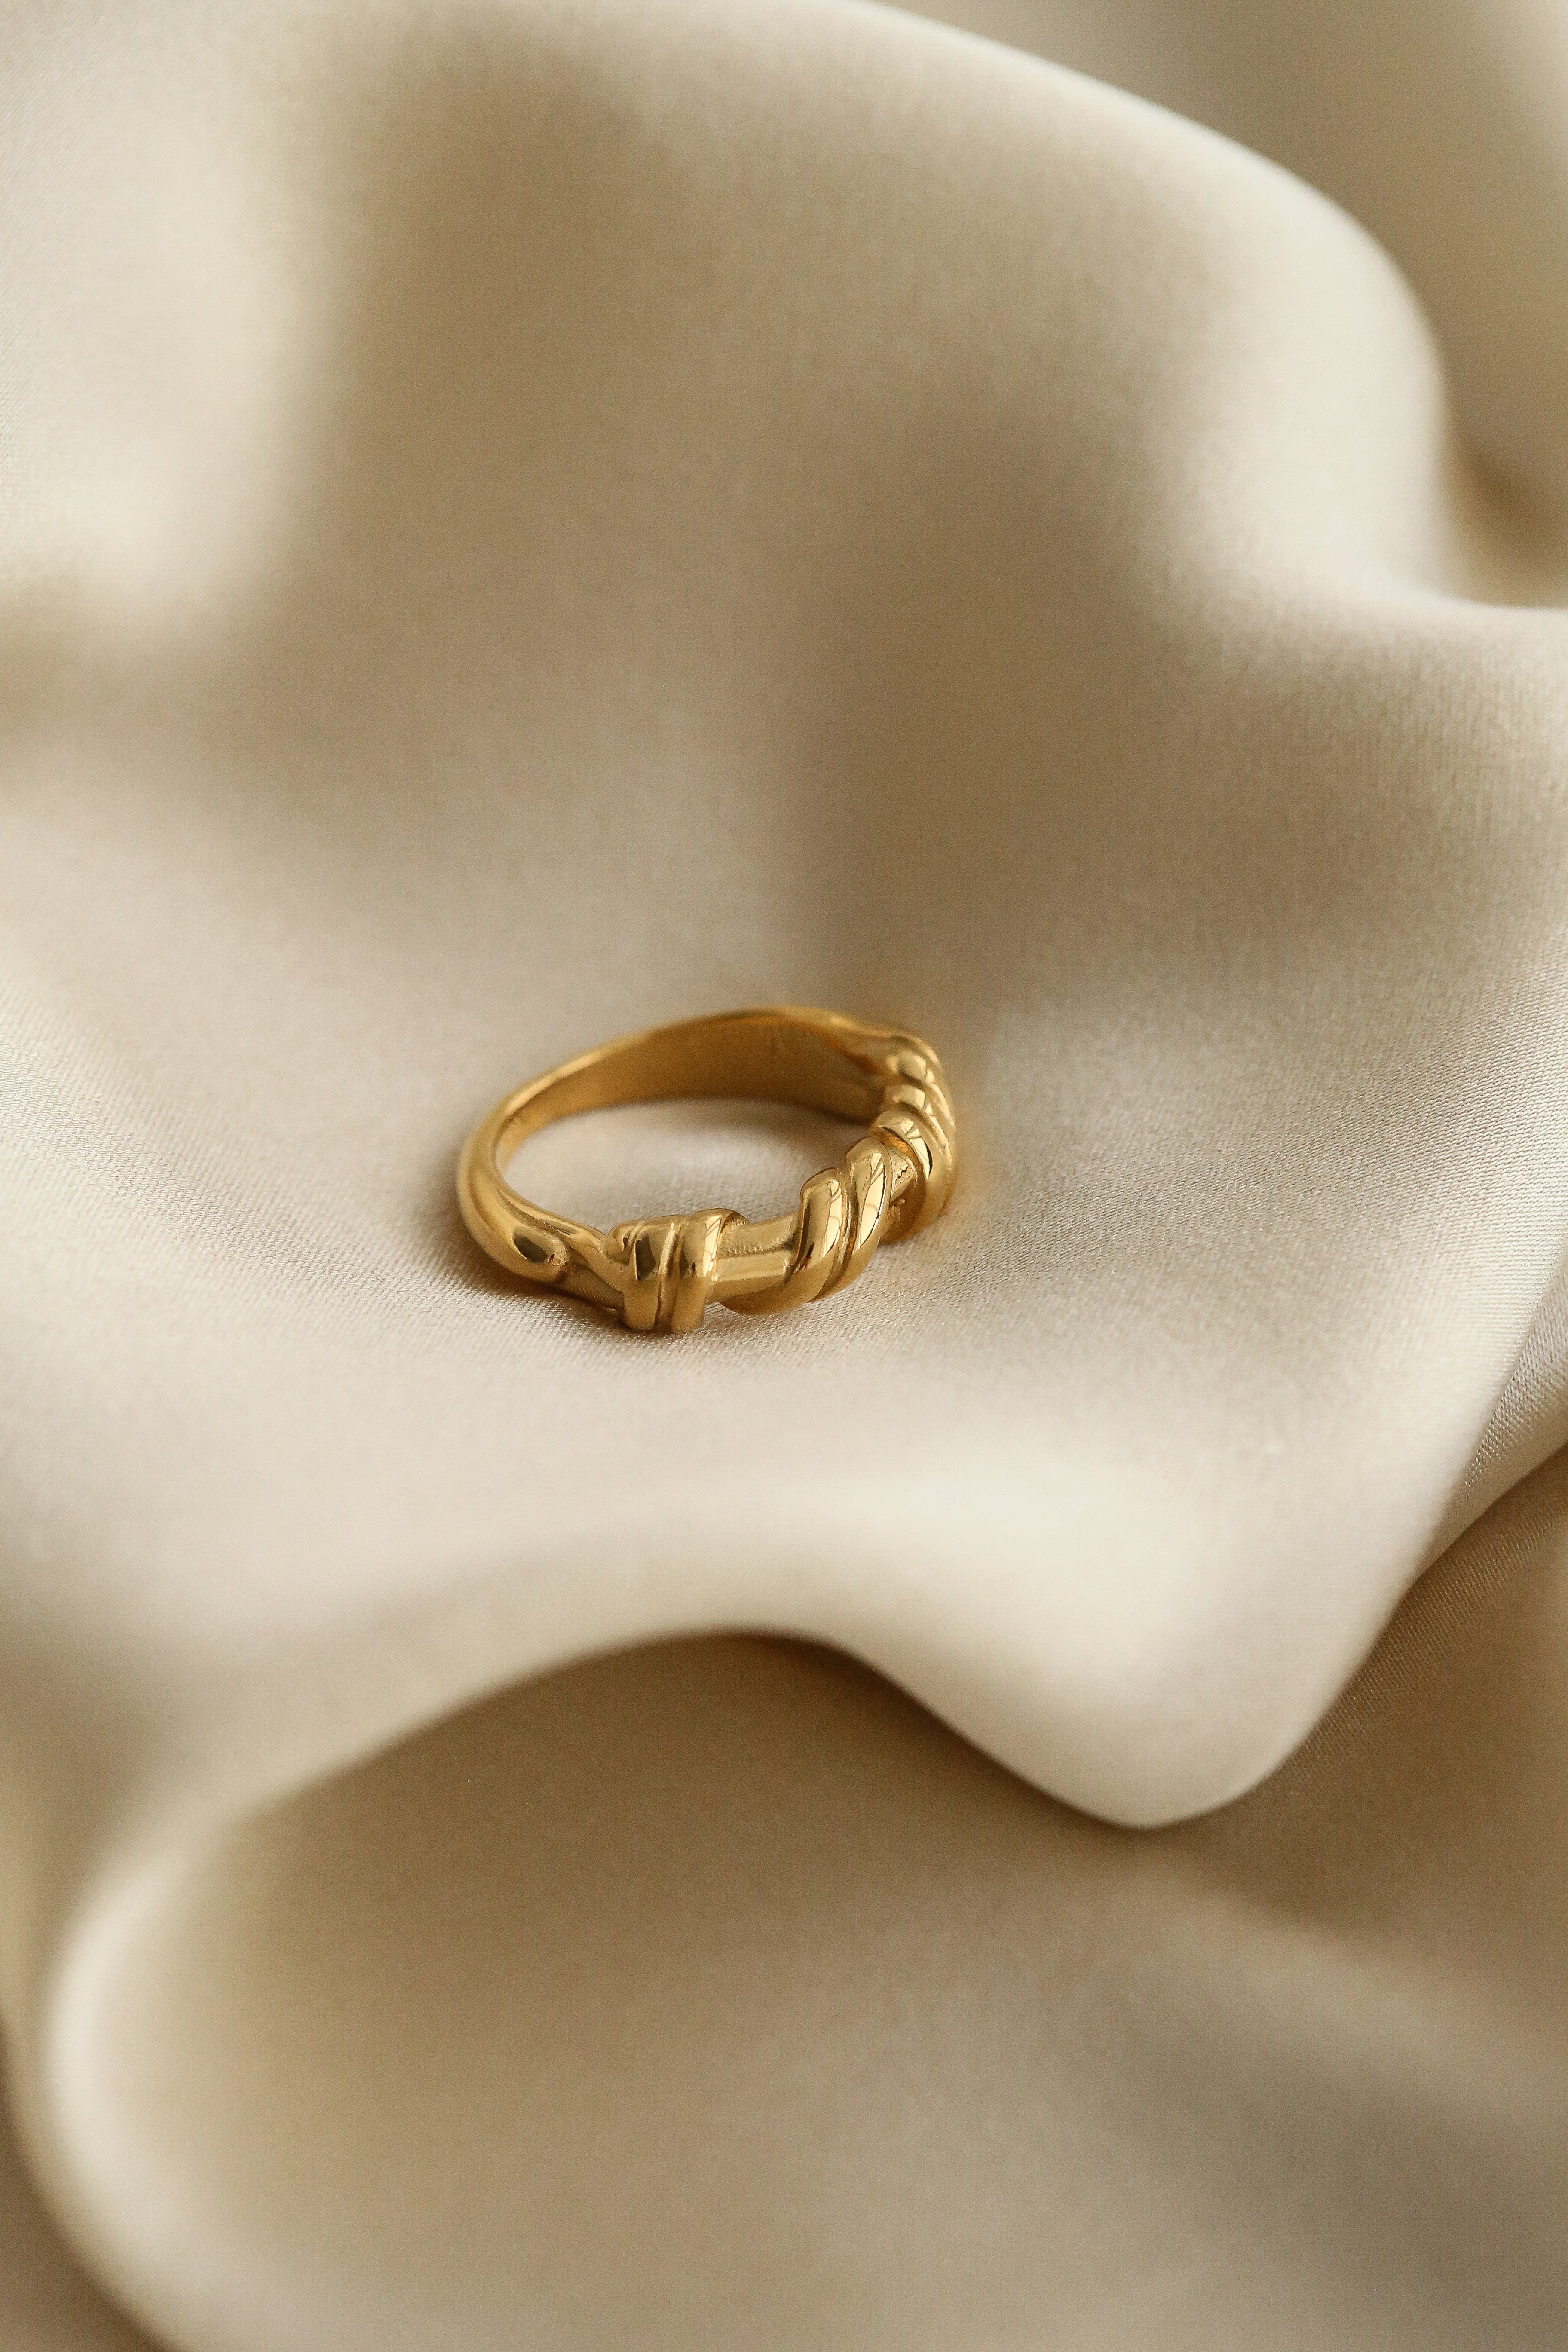 Joan Ring - Boutique Minimaliste has waterproof, durable, elegant and vintage inspired jewelry